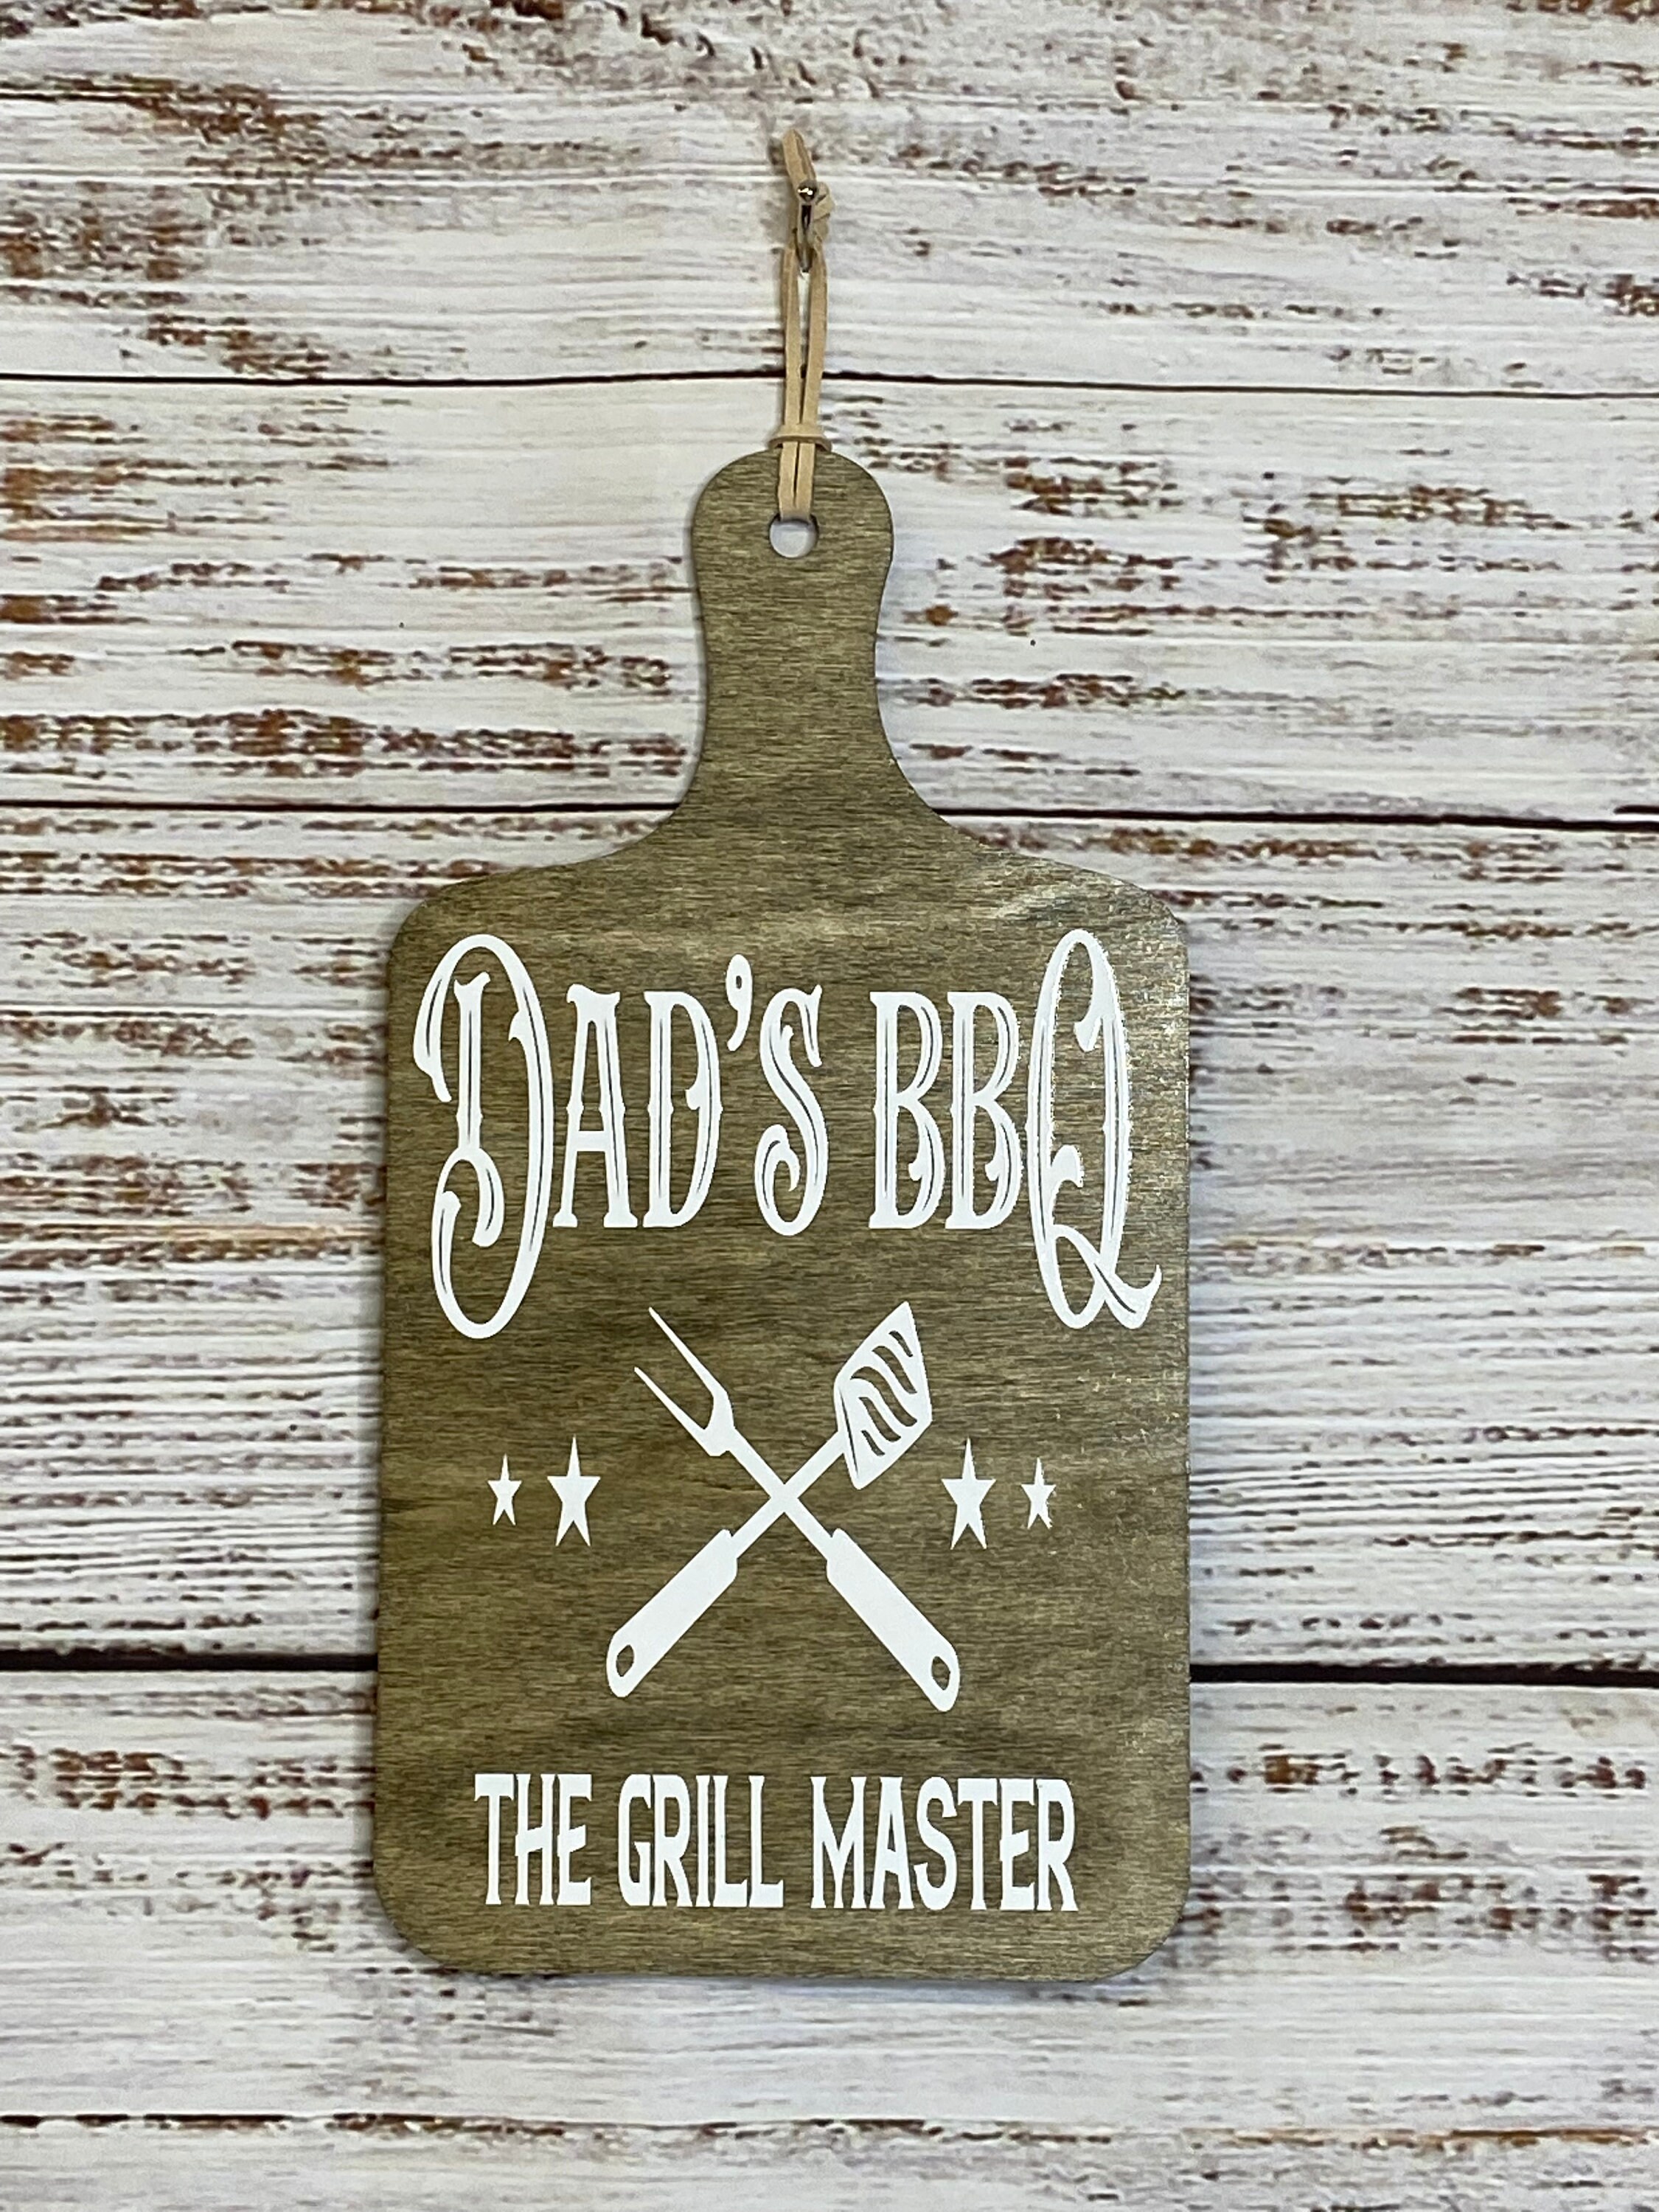 Inspired Living: Father's Day Gift Guide for Grill Master Dads